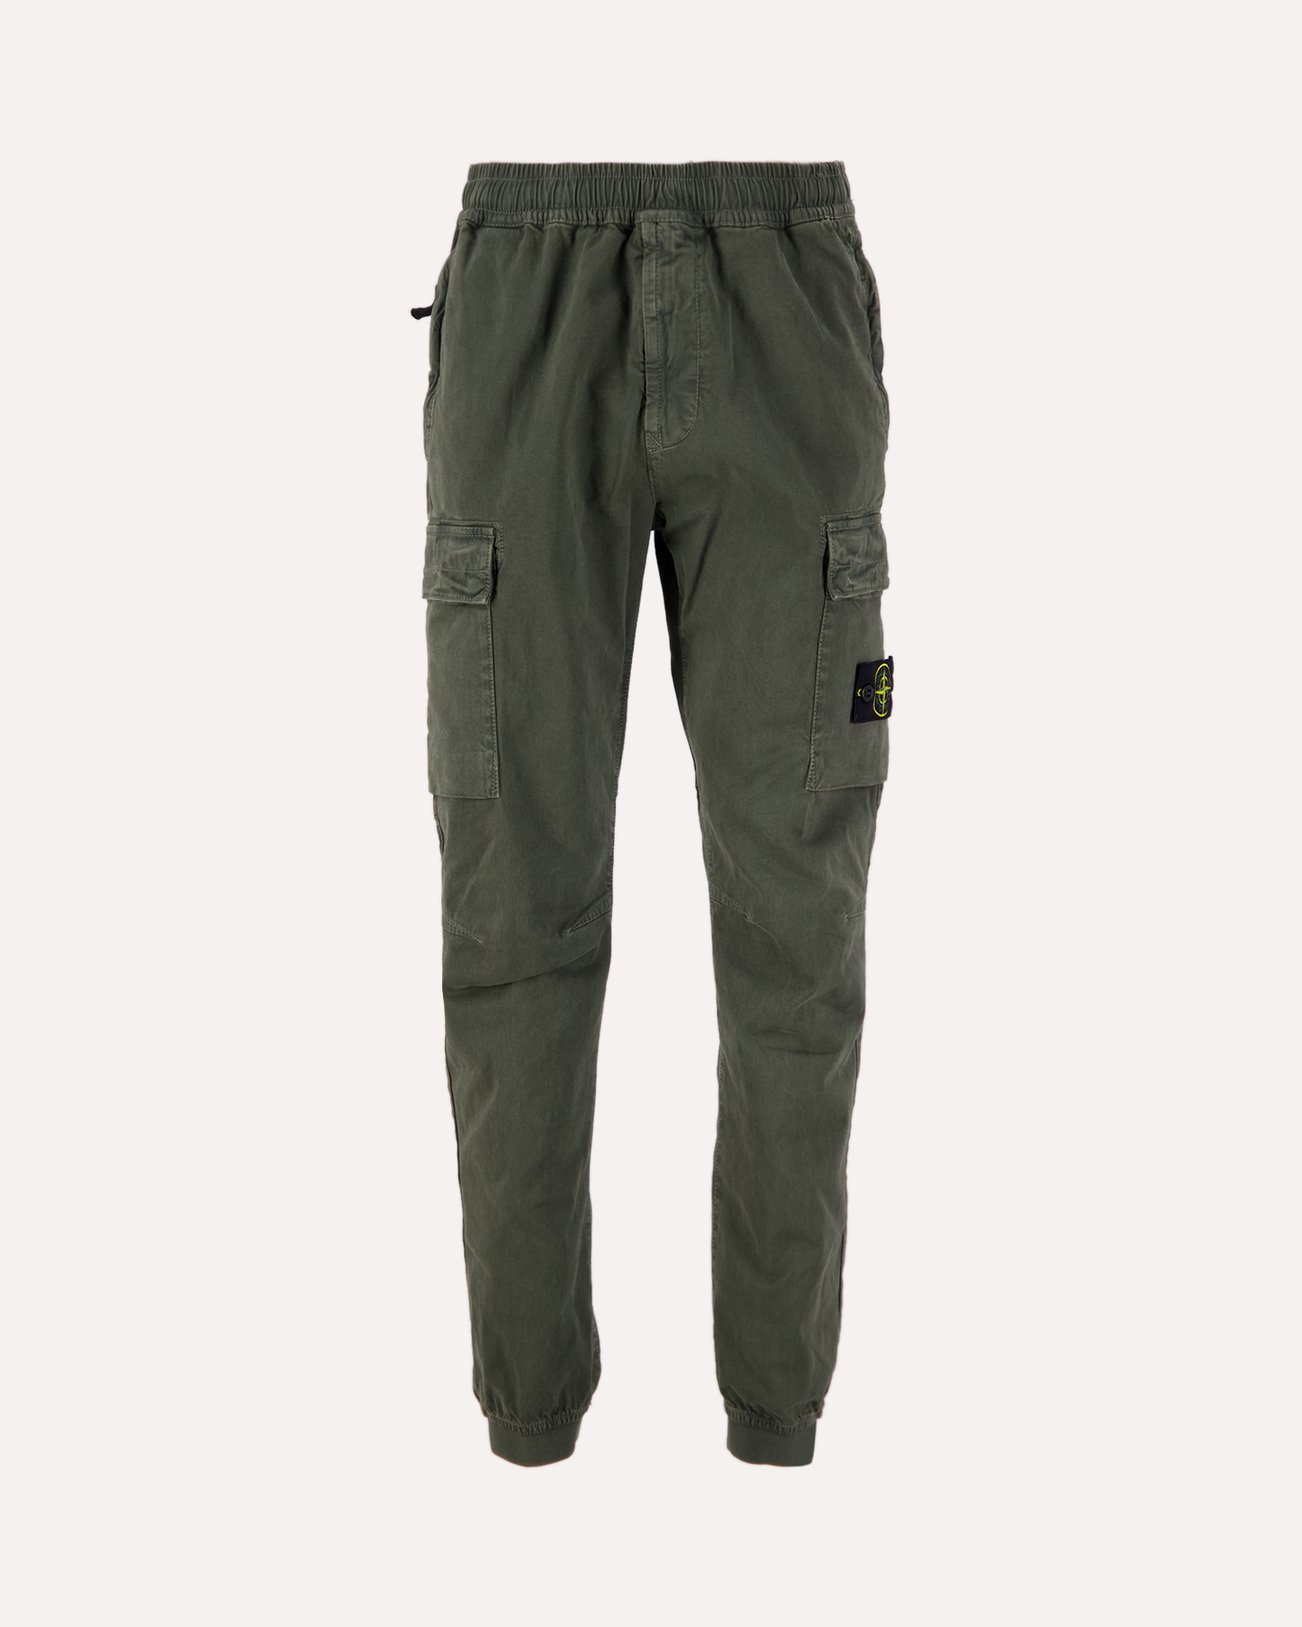 Stone Island 313L1 Cotton Twill Garment Dyed 'Old'Effect Cargo Pants GROEN 1